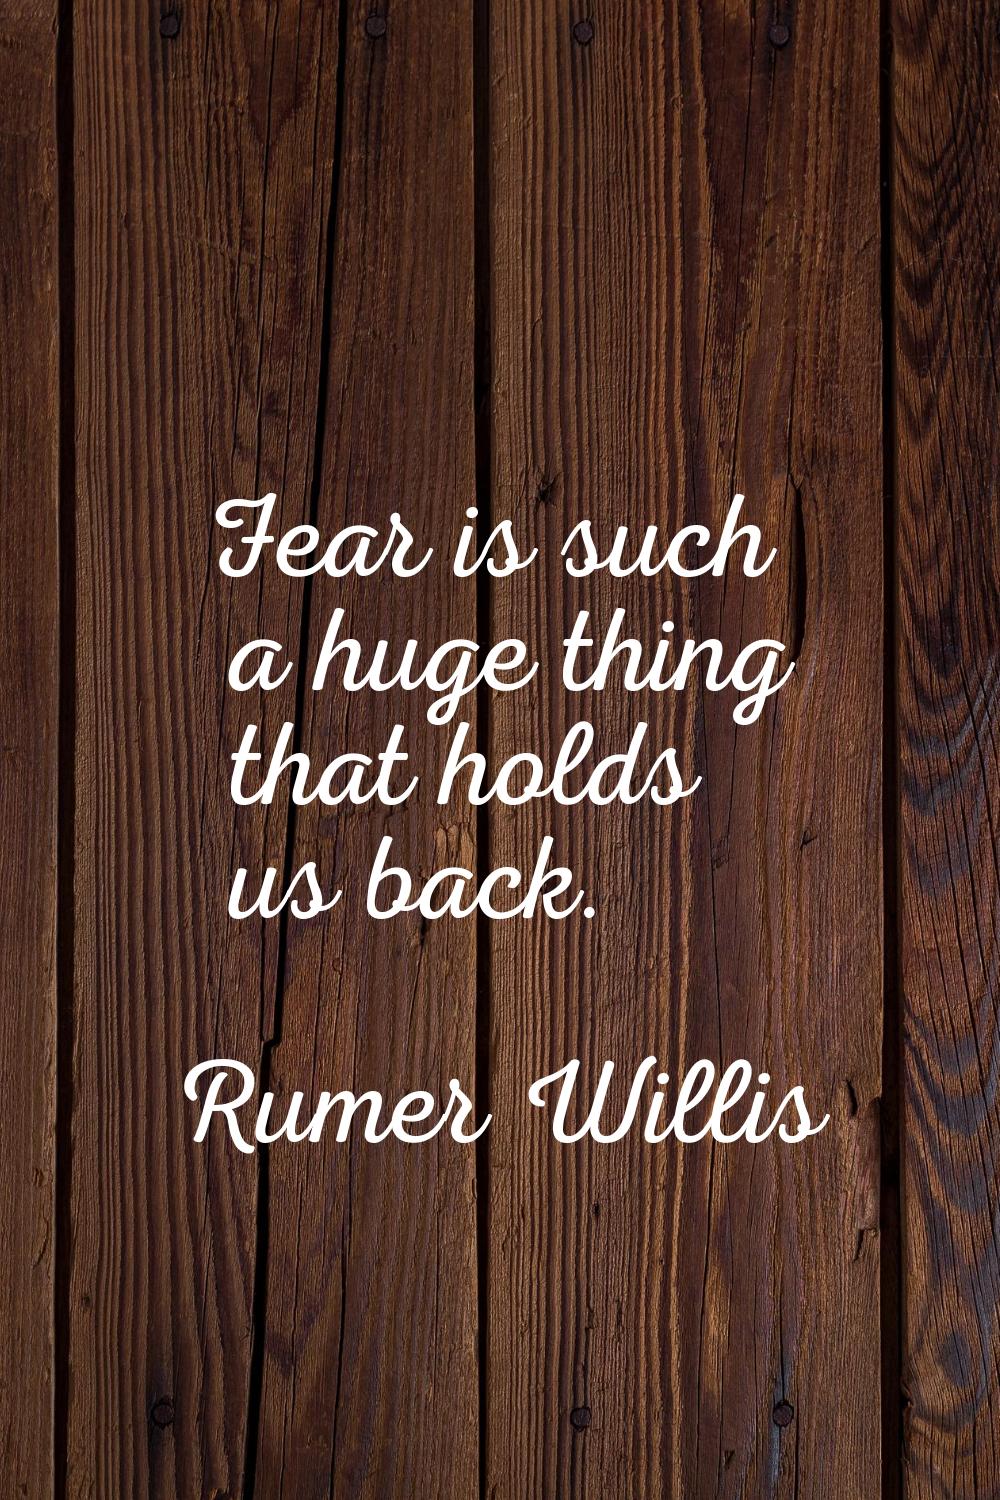 Fear is such a huge thing that holds us back.